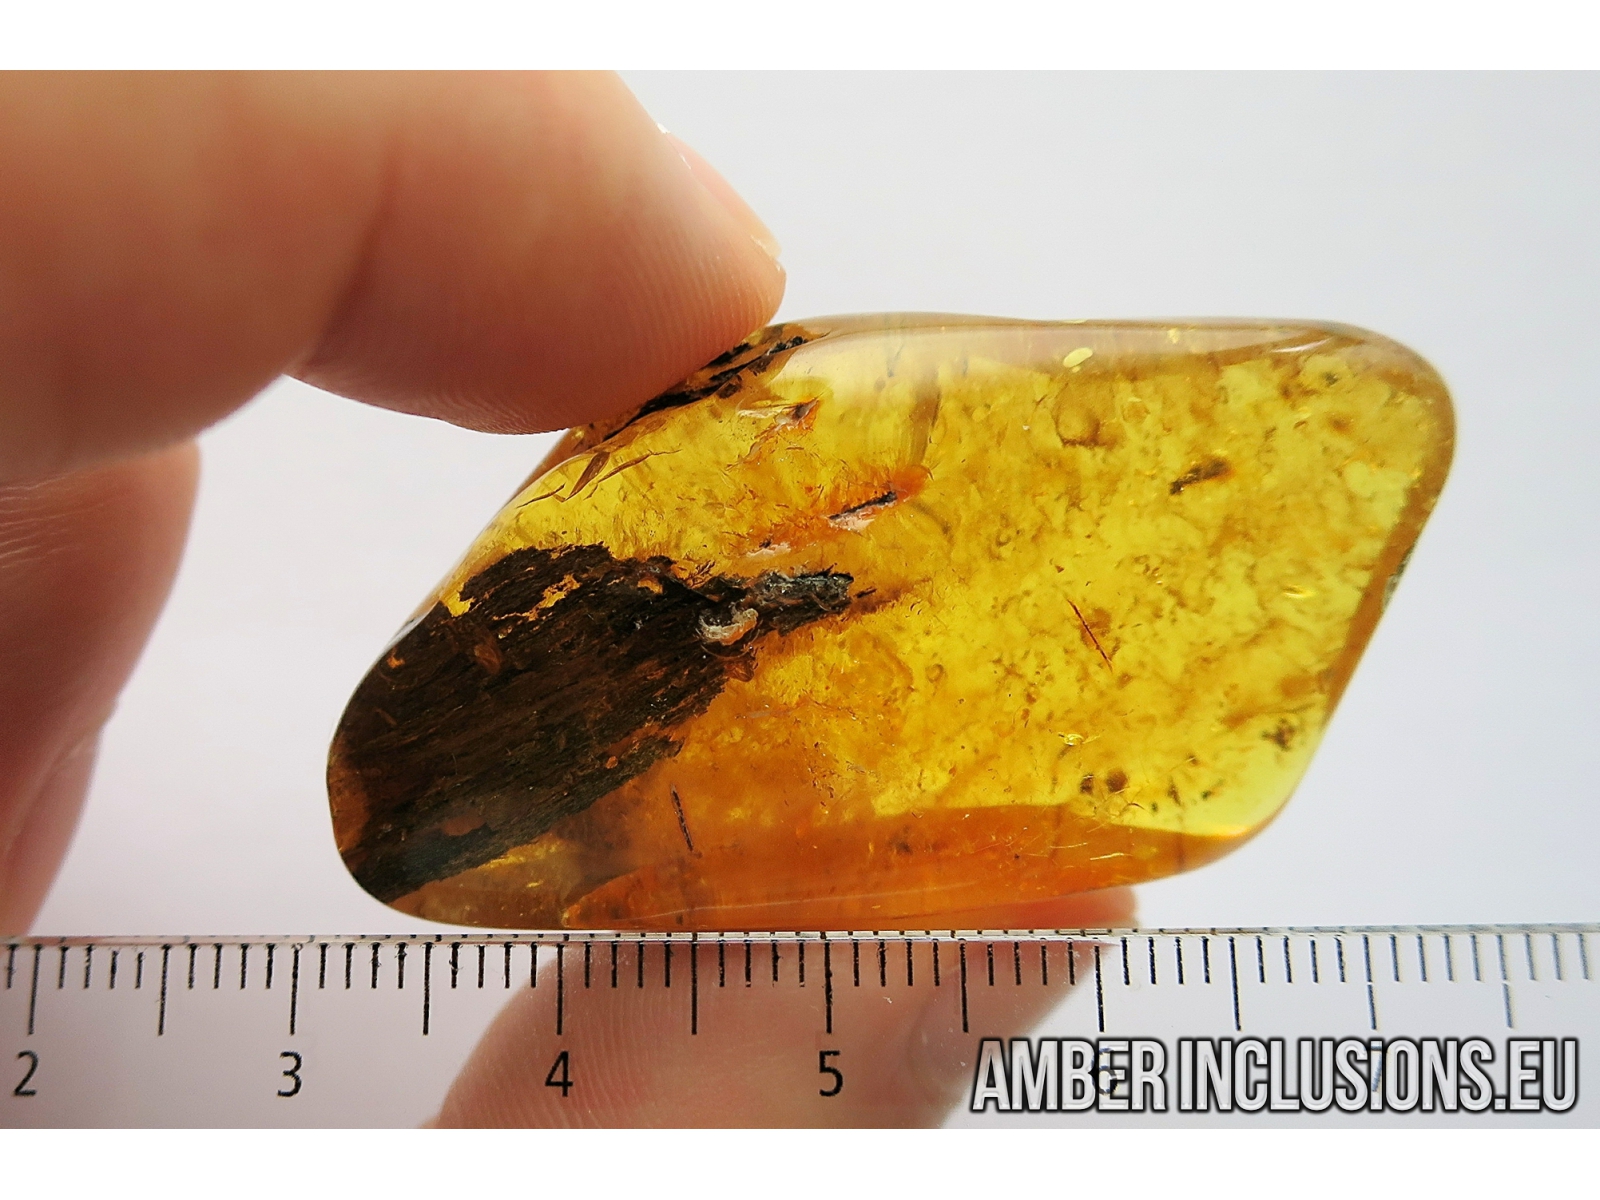 fumle Ældre borgere Kvadrant Big 25mm wood fragment. Fossil inclusion in Baltic amber #9099 |  www.amberinclusions.eu